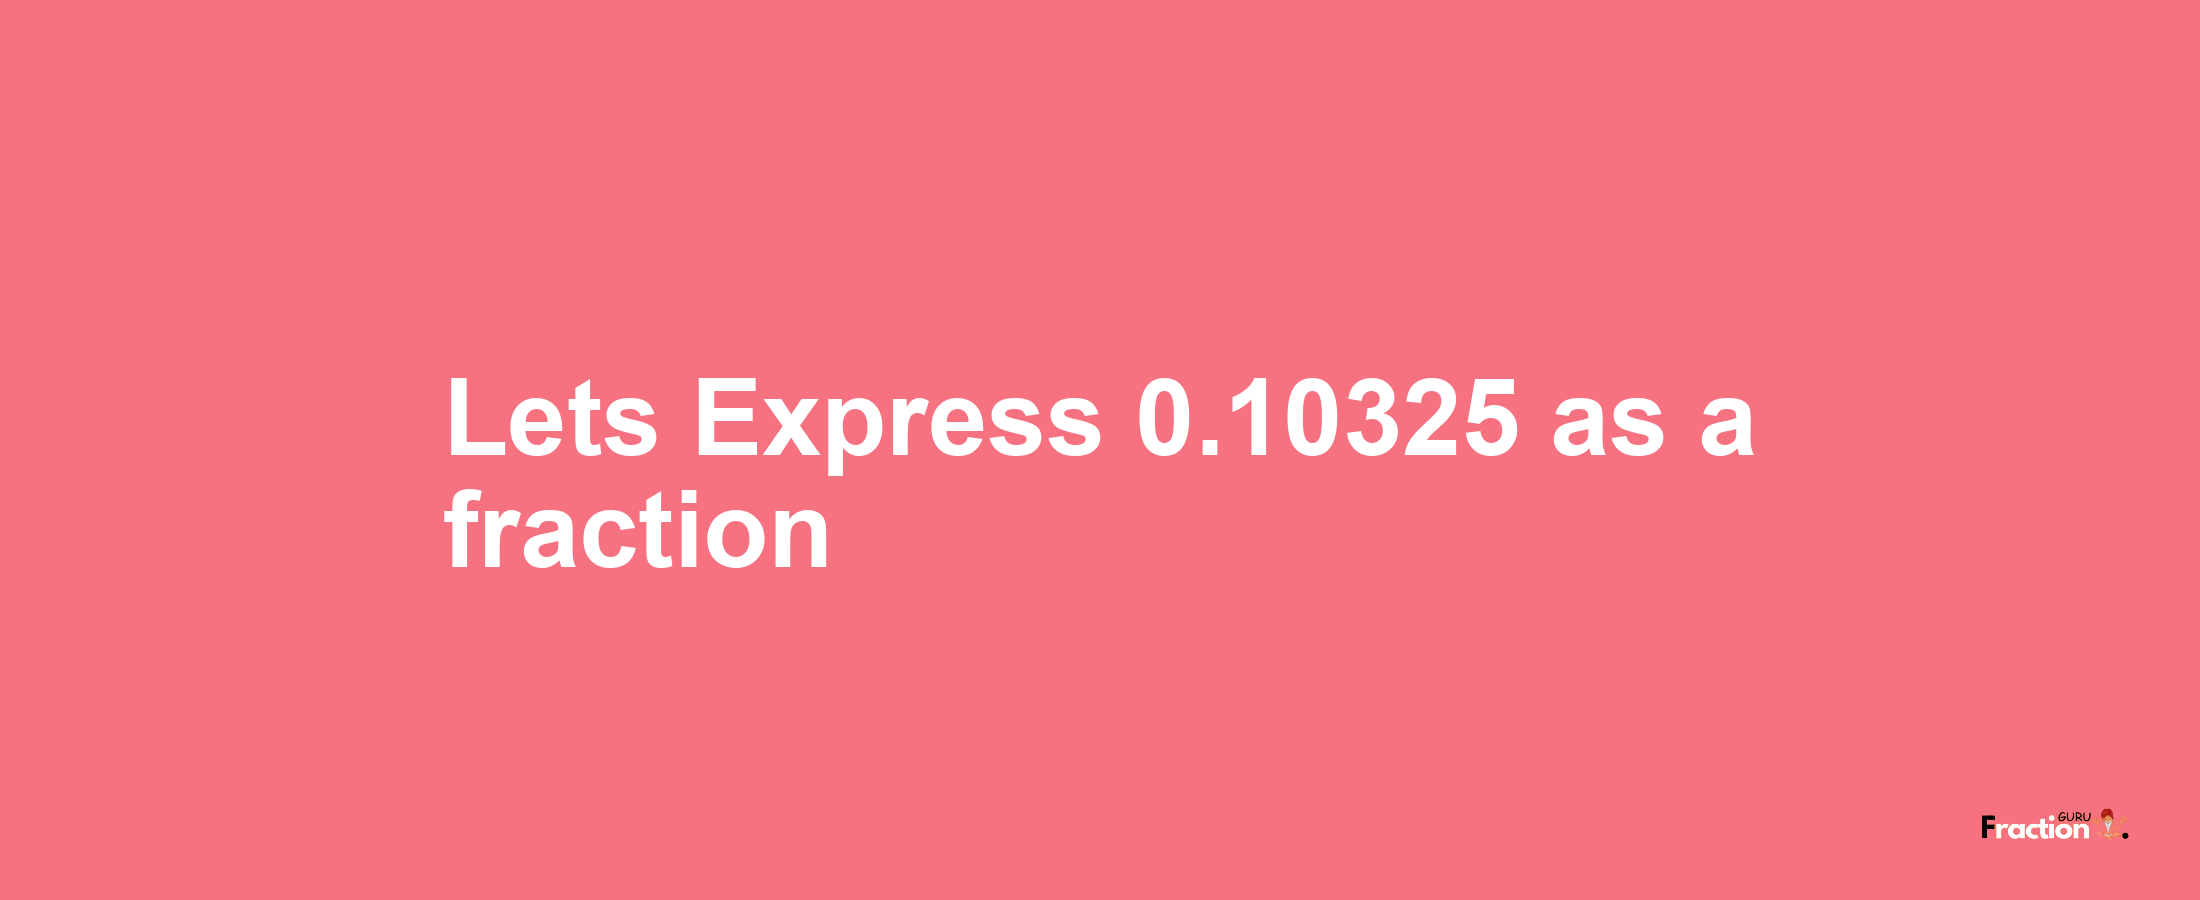 Lets Express 0.10325 as afraction